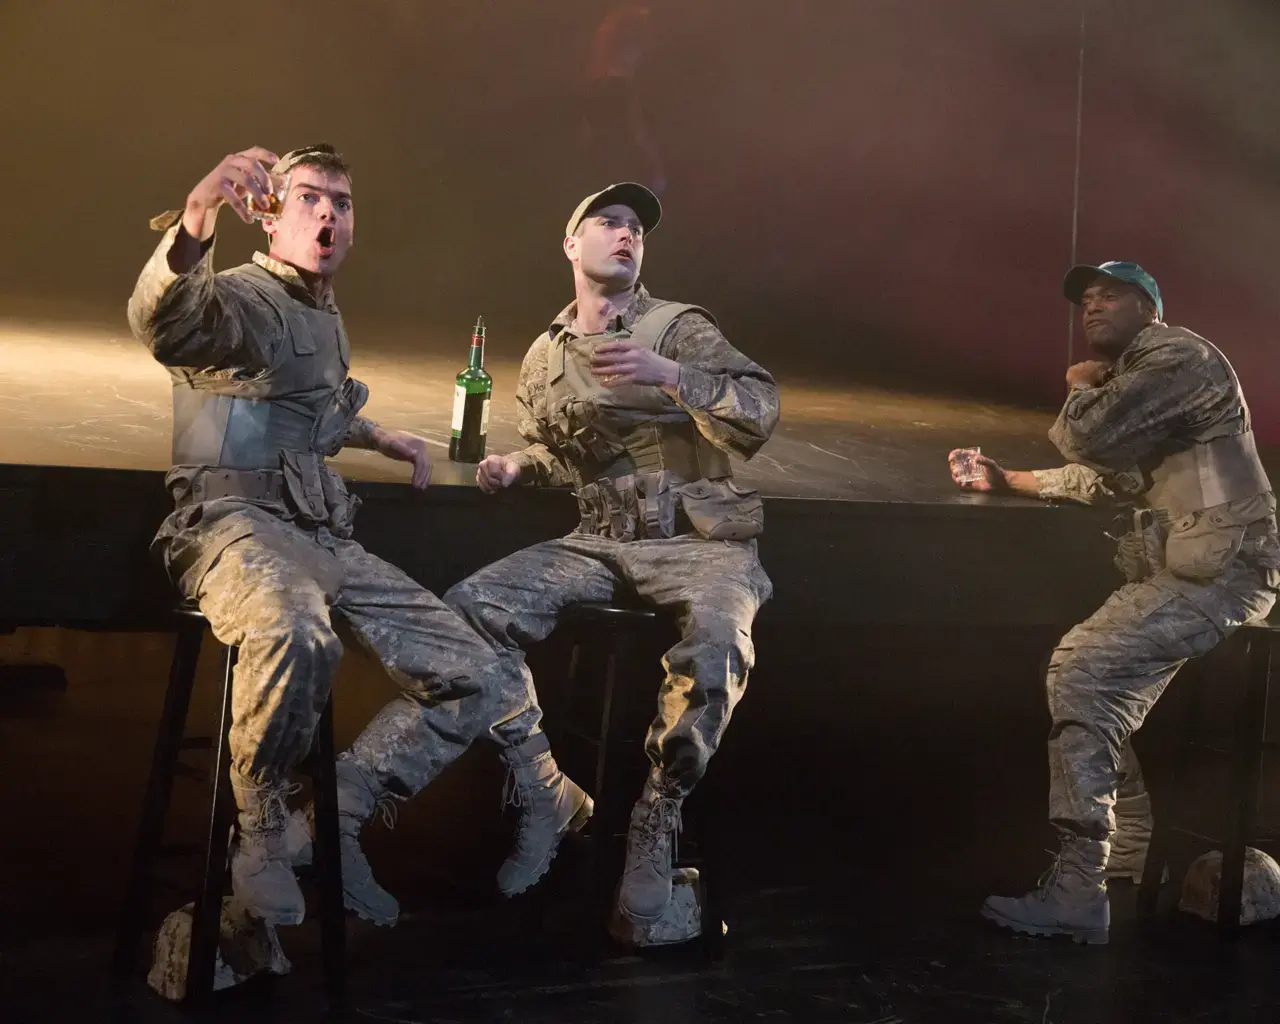 Brian Ratcliffe, Kevin Meehan, and Lindsay Smiling in Don Juan Comes Home from Iraq. Photo by Alexander Iziliaev.